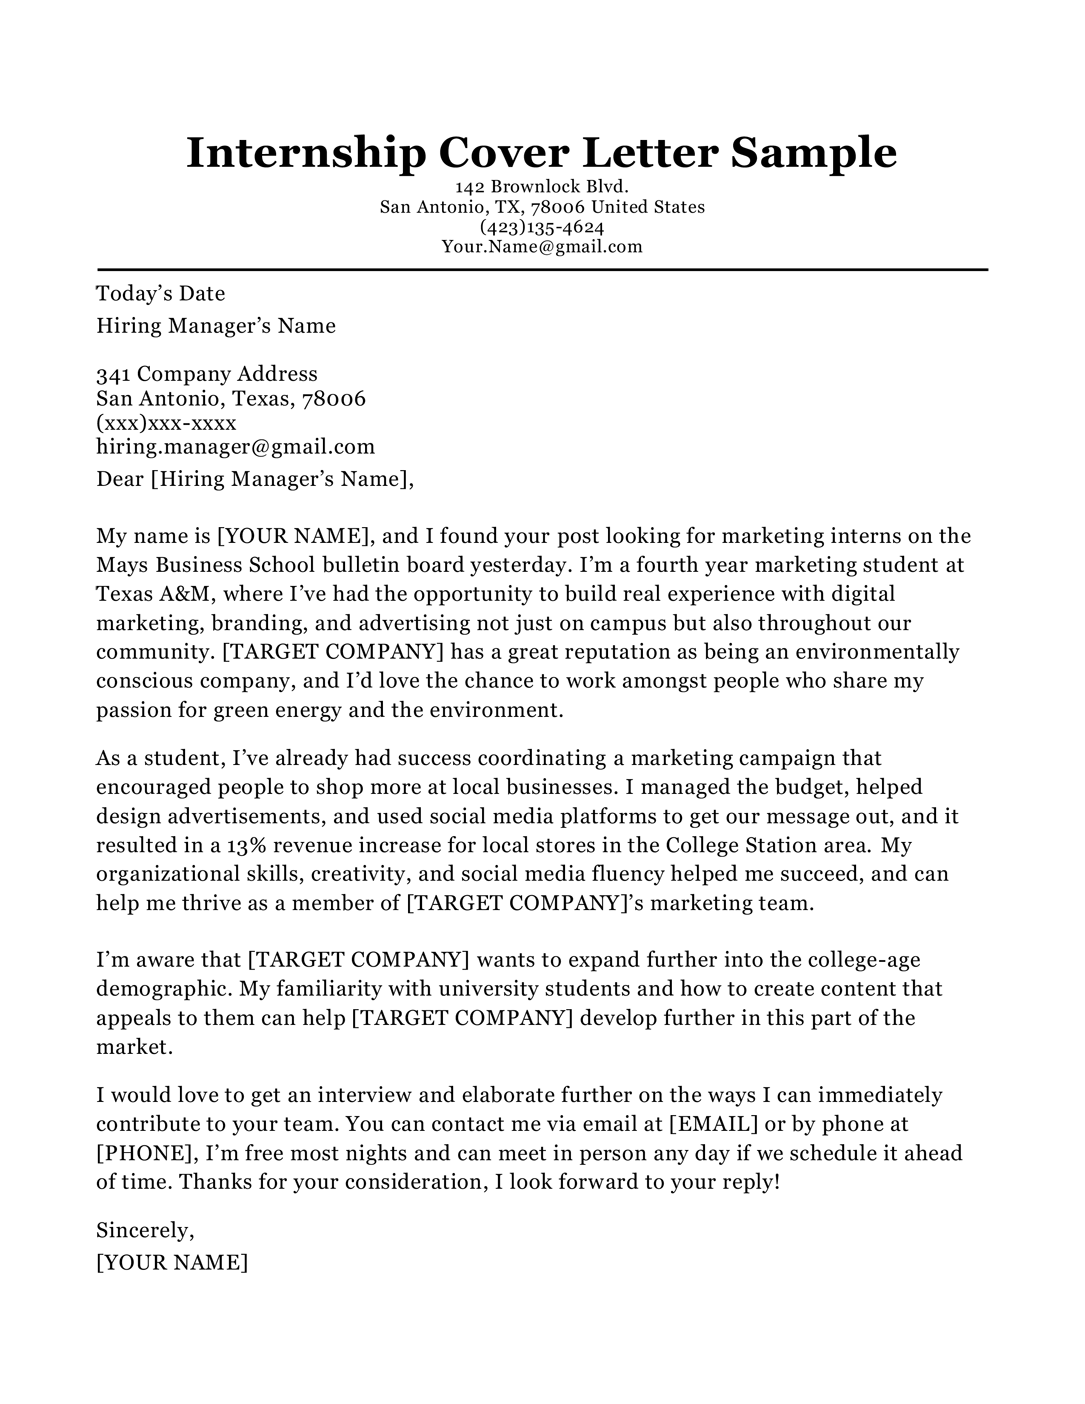 Sample Cover Letter For Students Applying For An Internship from resumecompanion.com